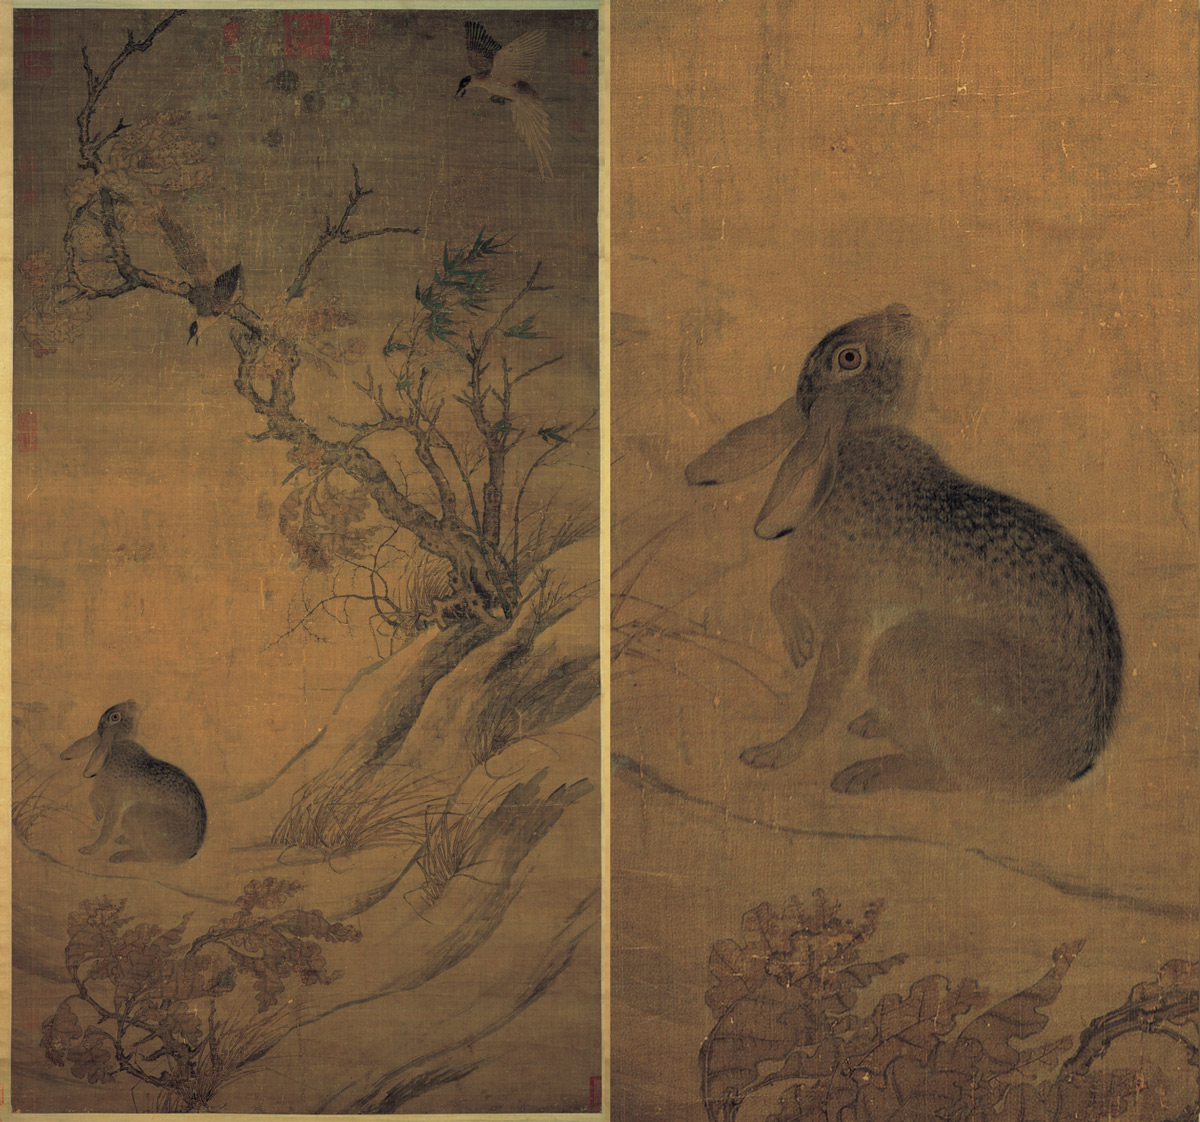 “Magpies and Hare” and its details. From The National Palace Museum Open Data